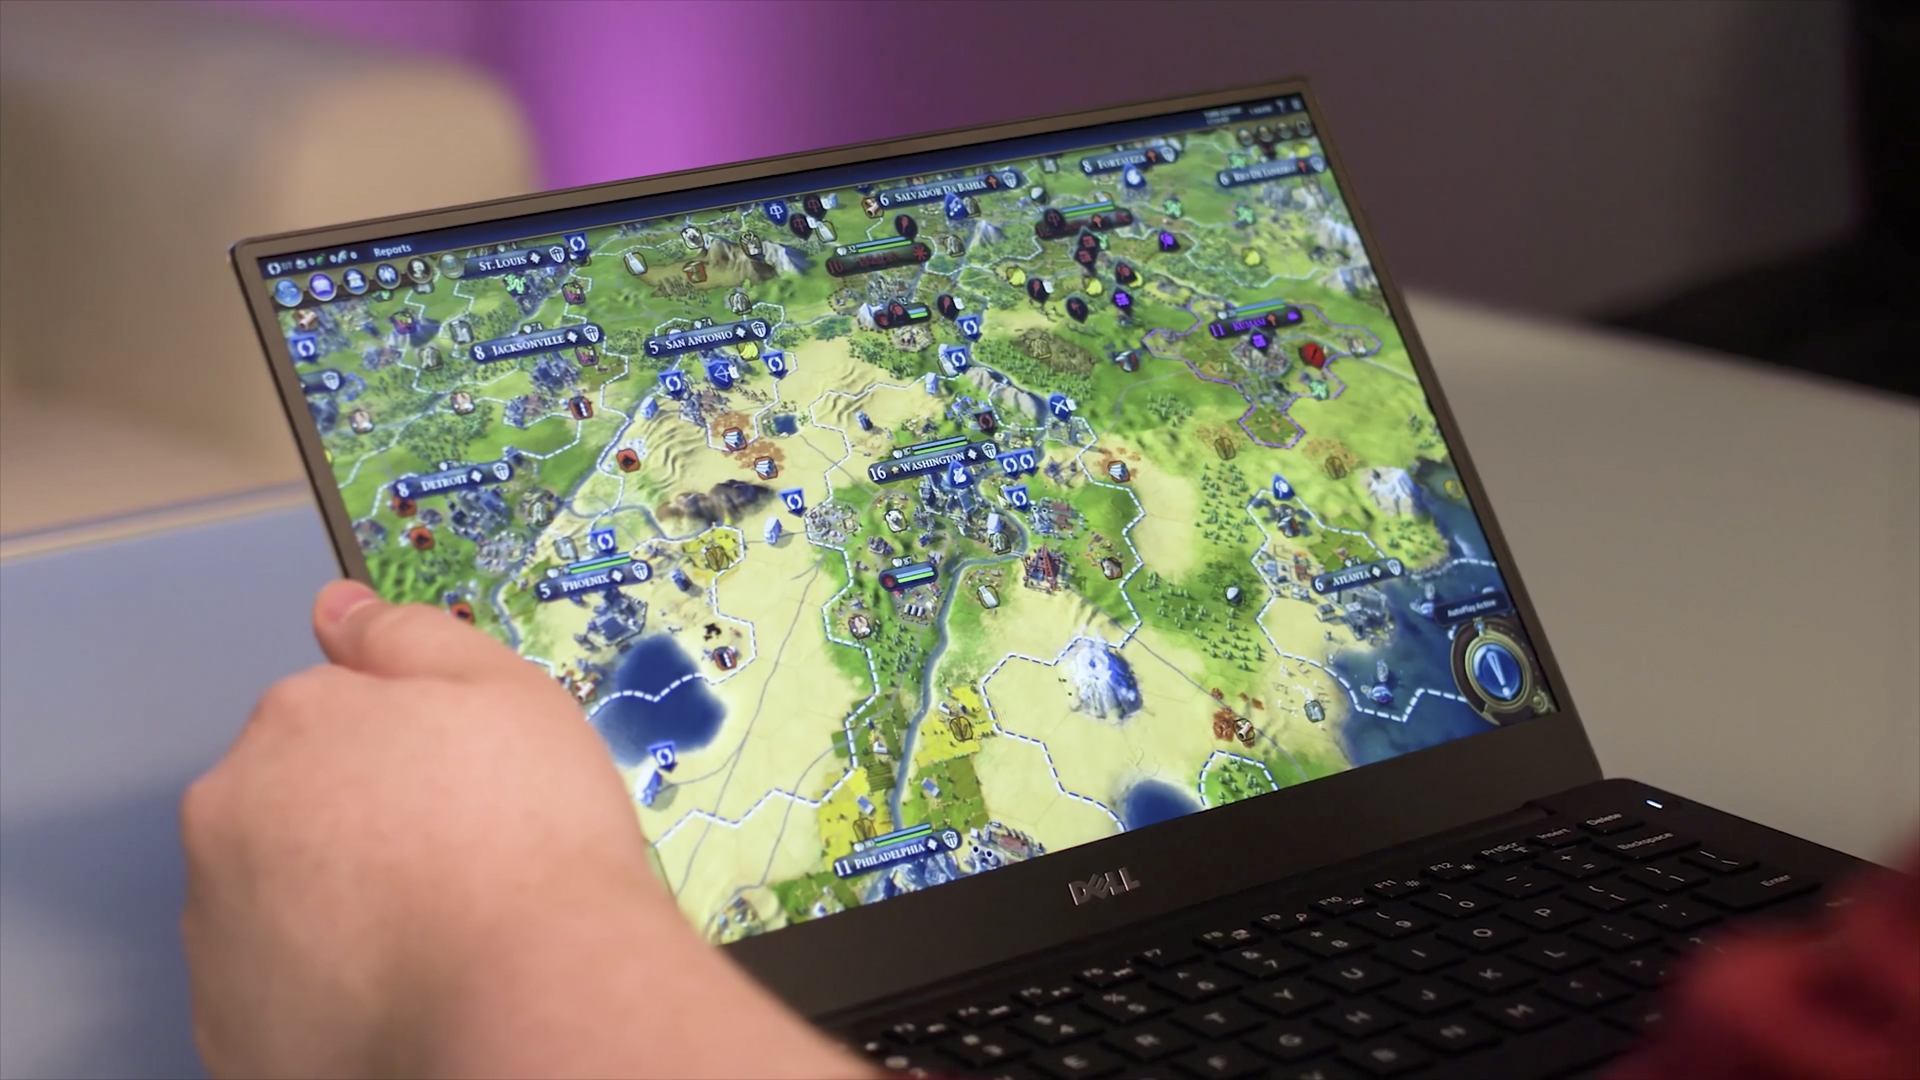 World of Warcraft on AMD, Intel and Apple integrated graphics